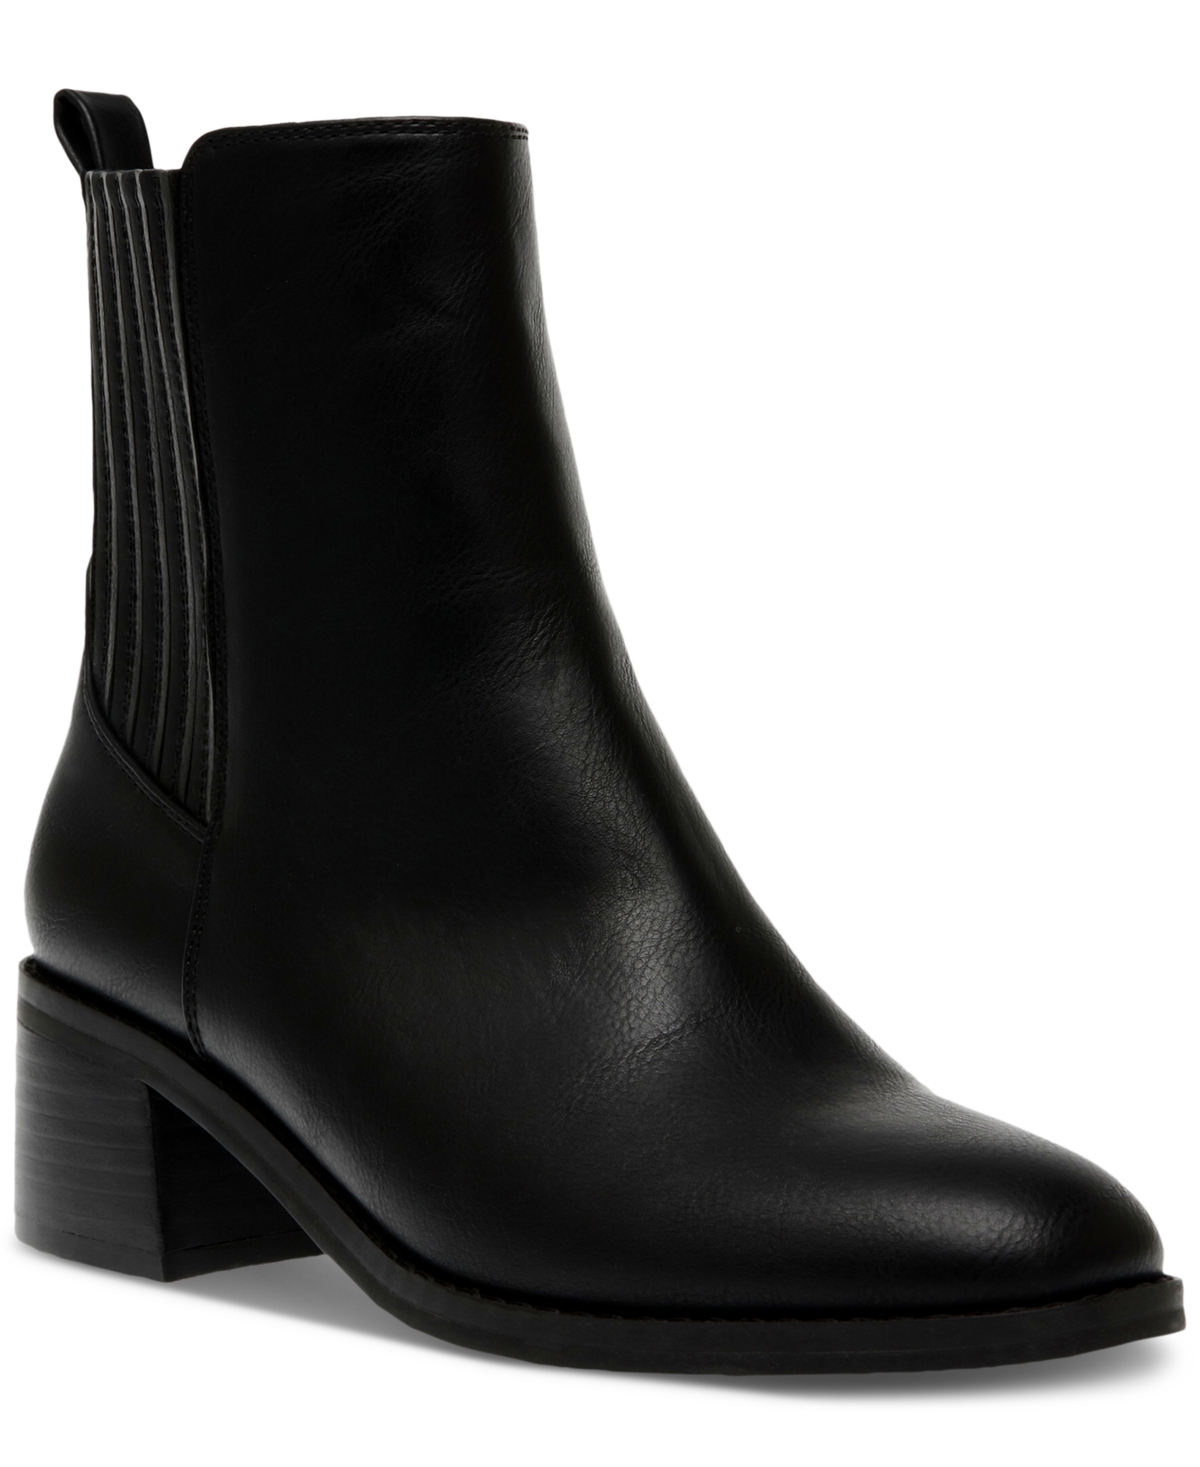 Women's Delilah Tailored Chelsea Booties - Black Smooth